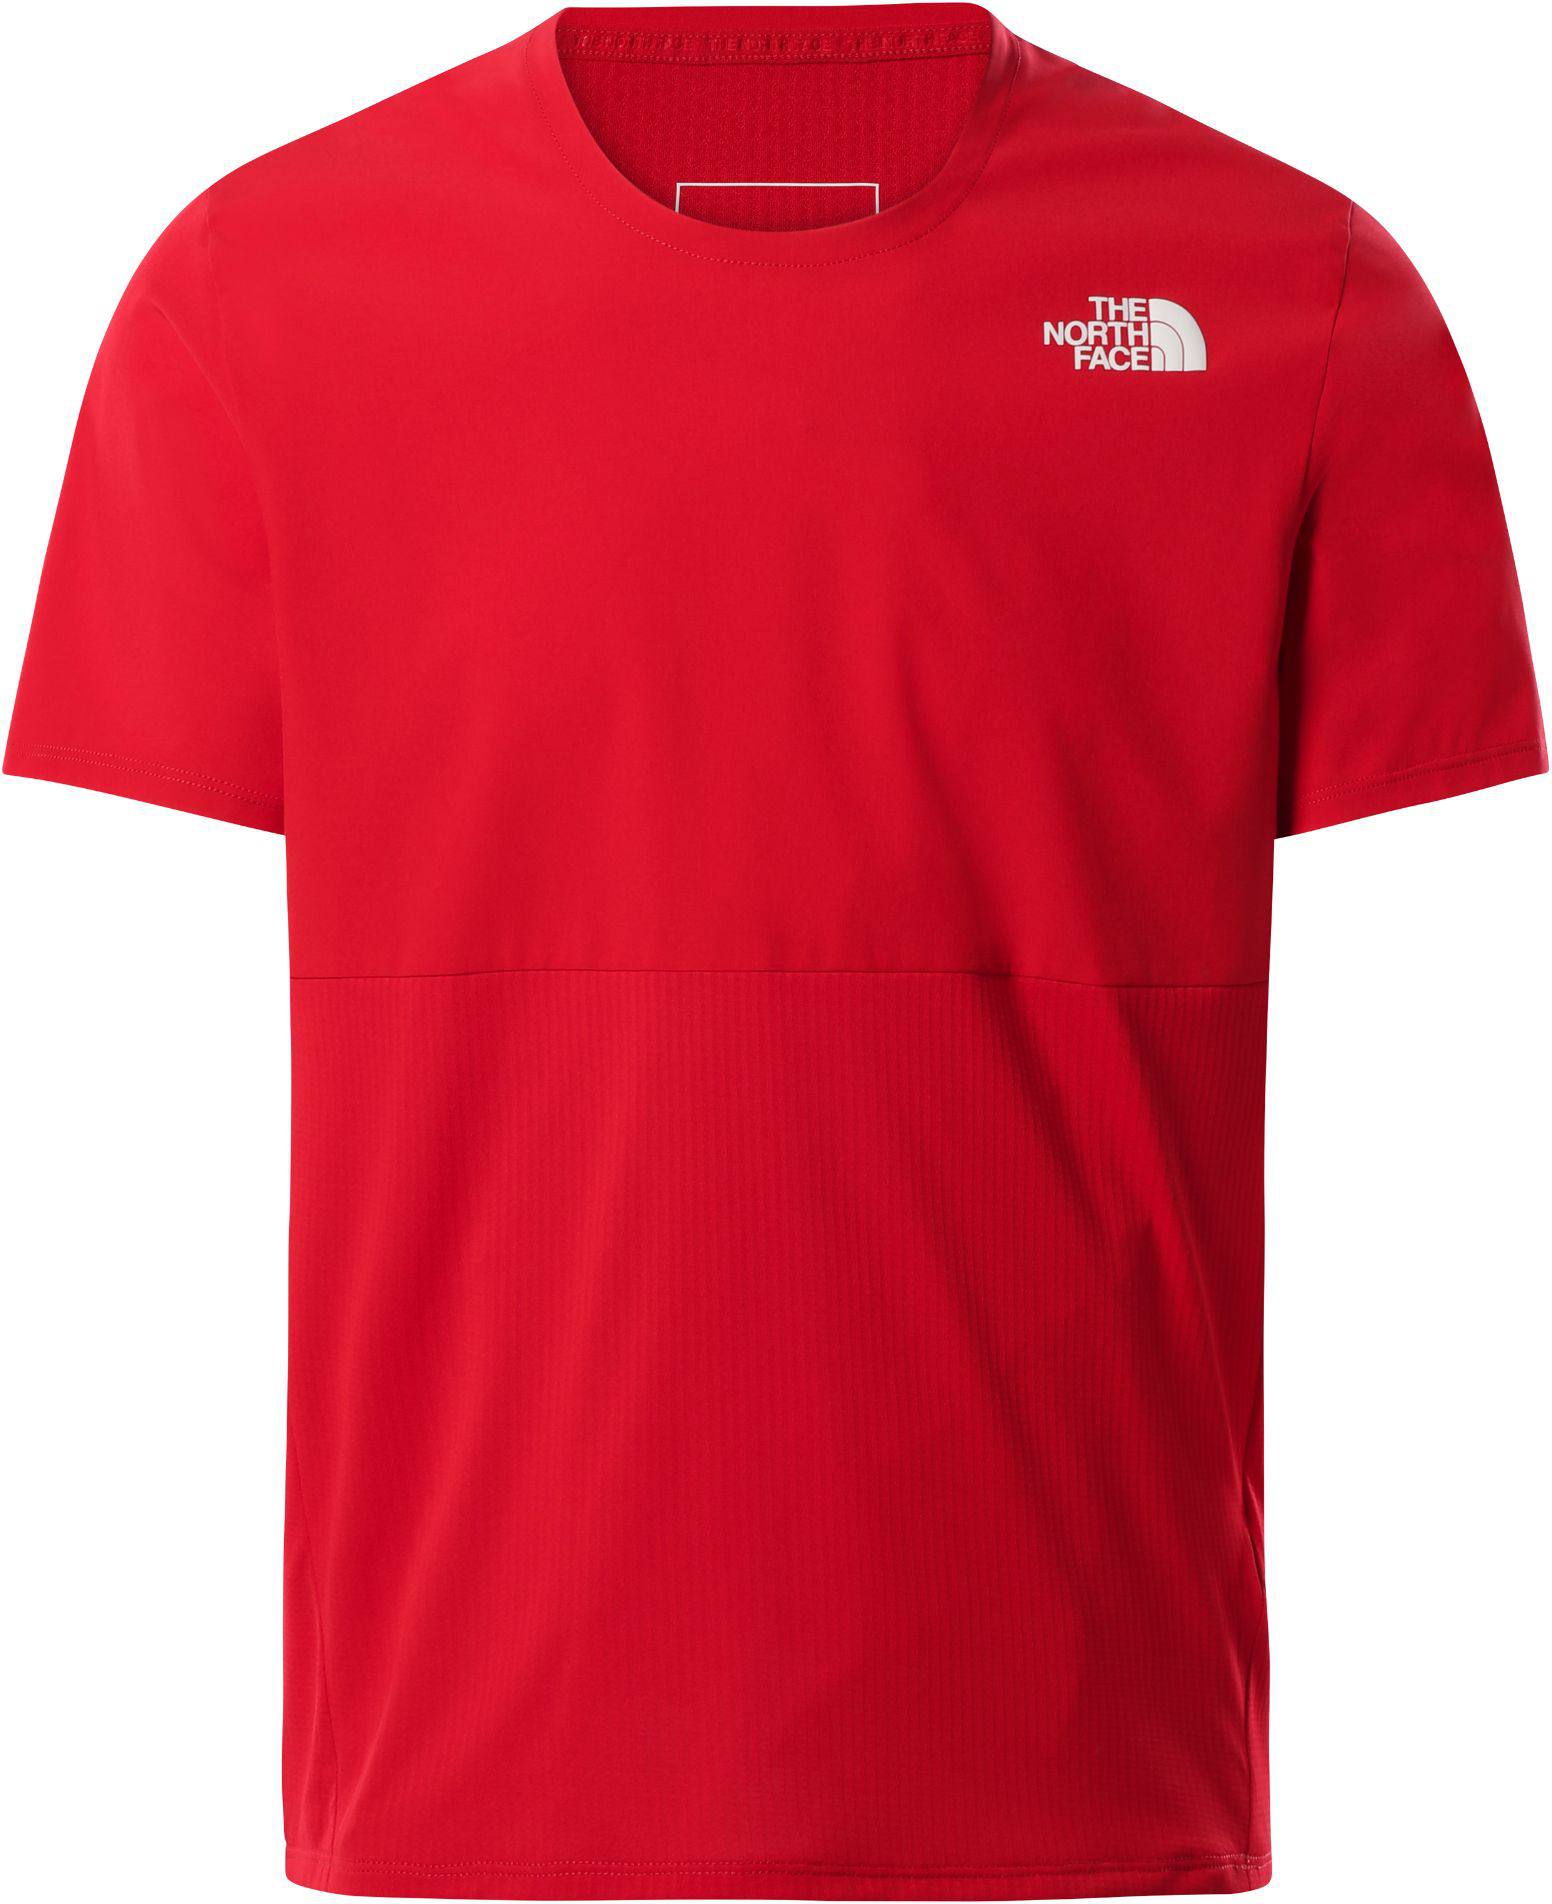 The North Face True Run S/S Shirt